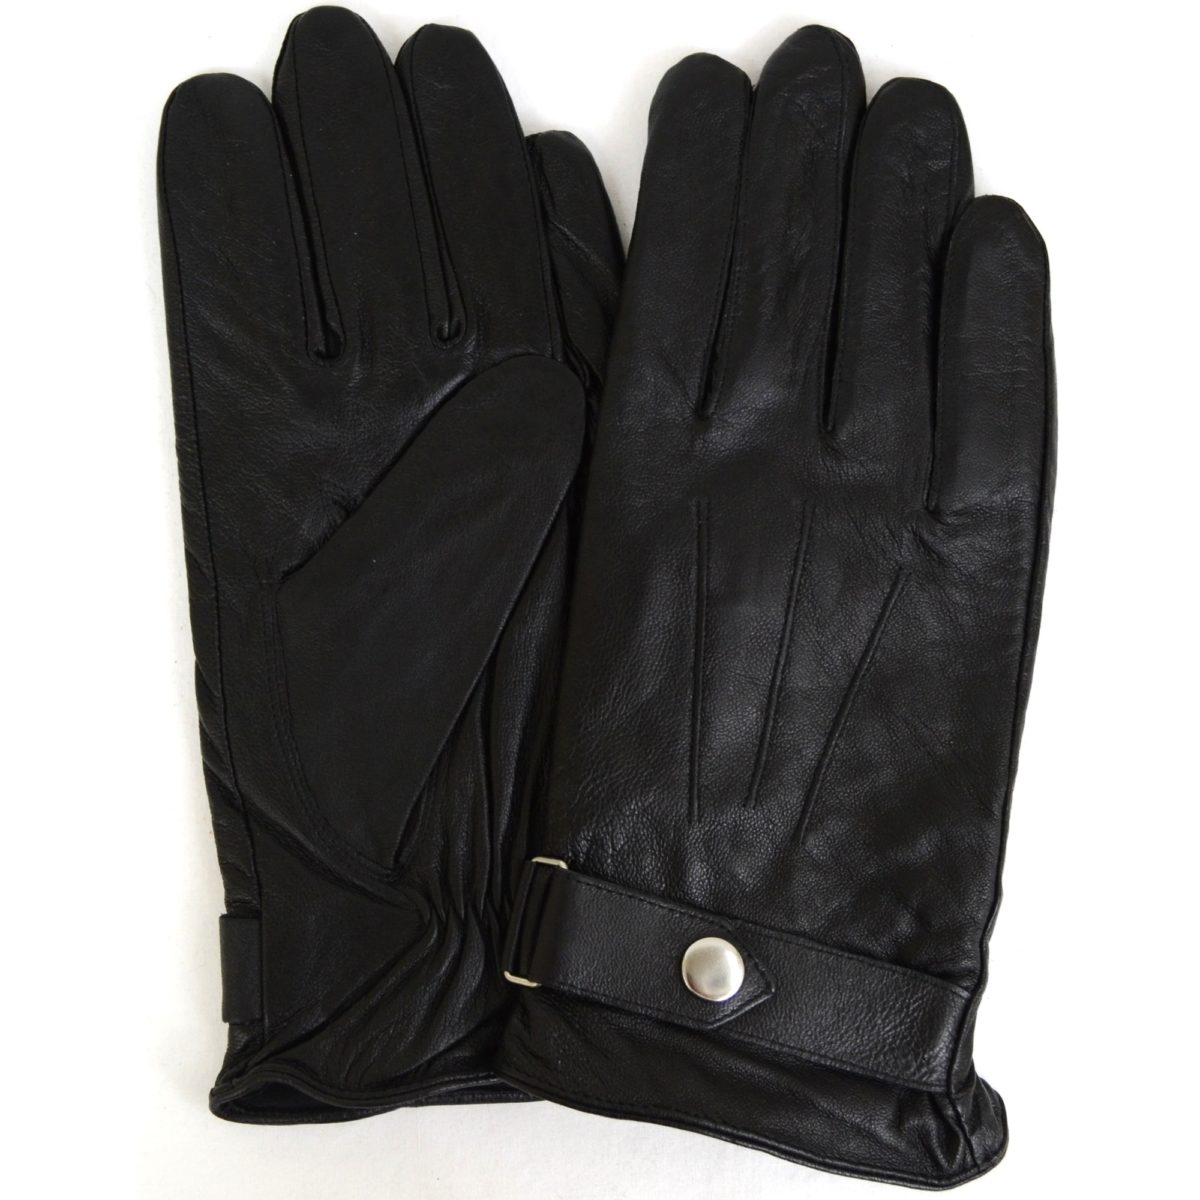 Leather Gloves with Centre Stud - Black SNUGRUGS